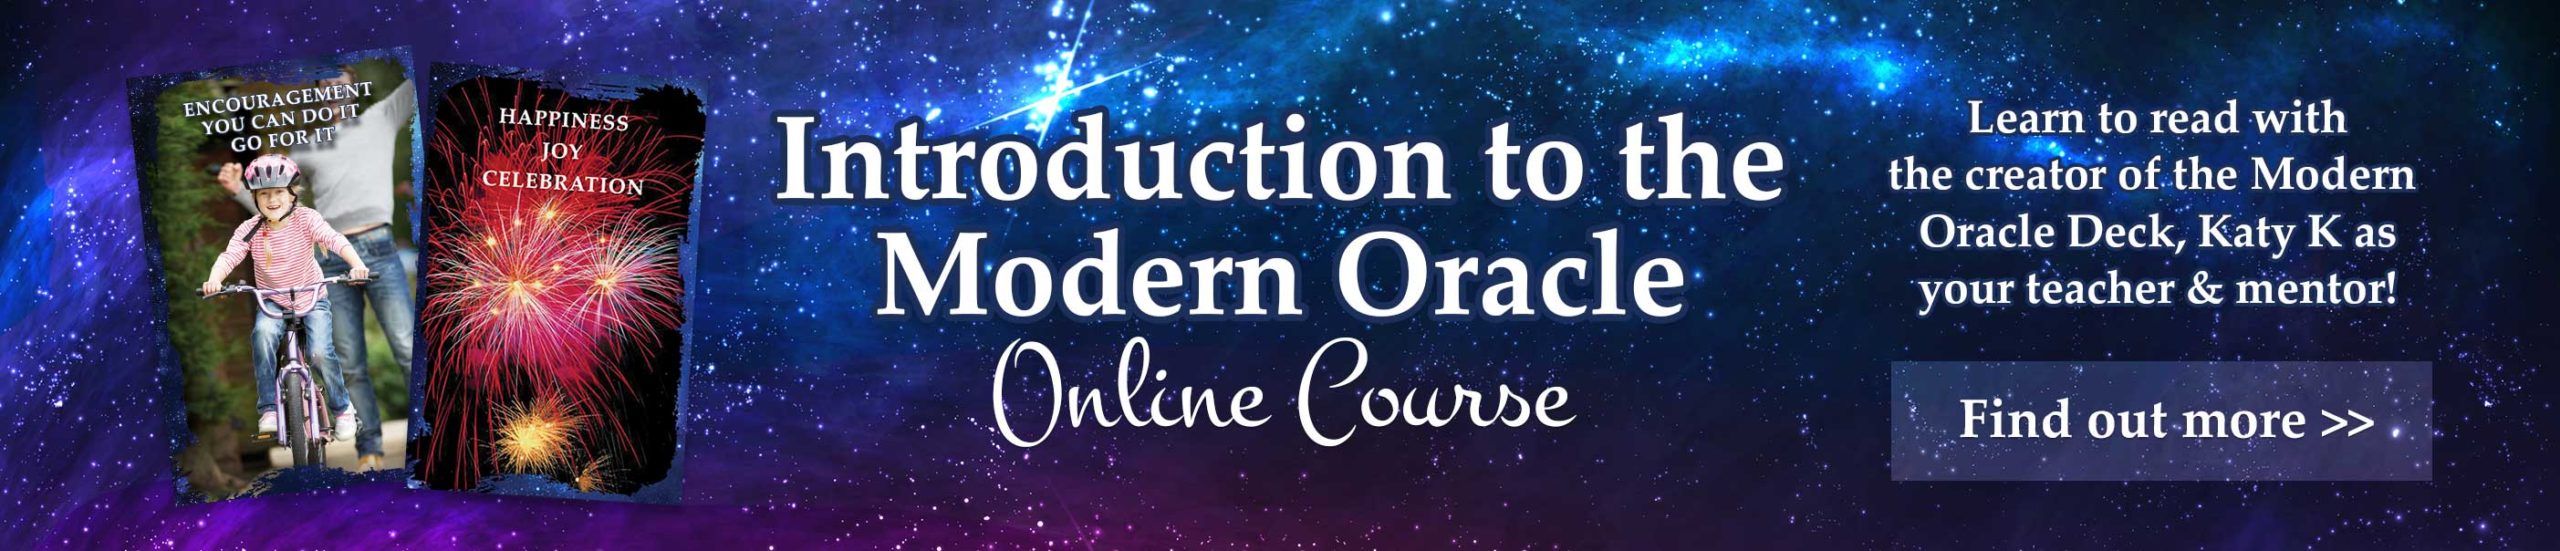 Introduction to the Modern Oracle Online Course